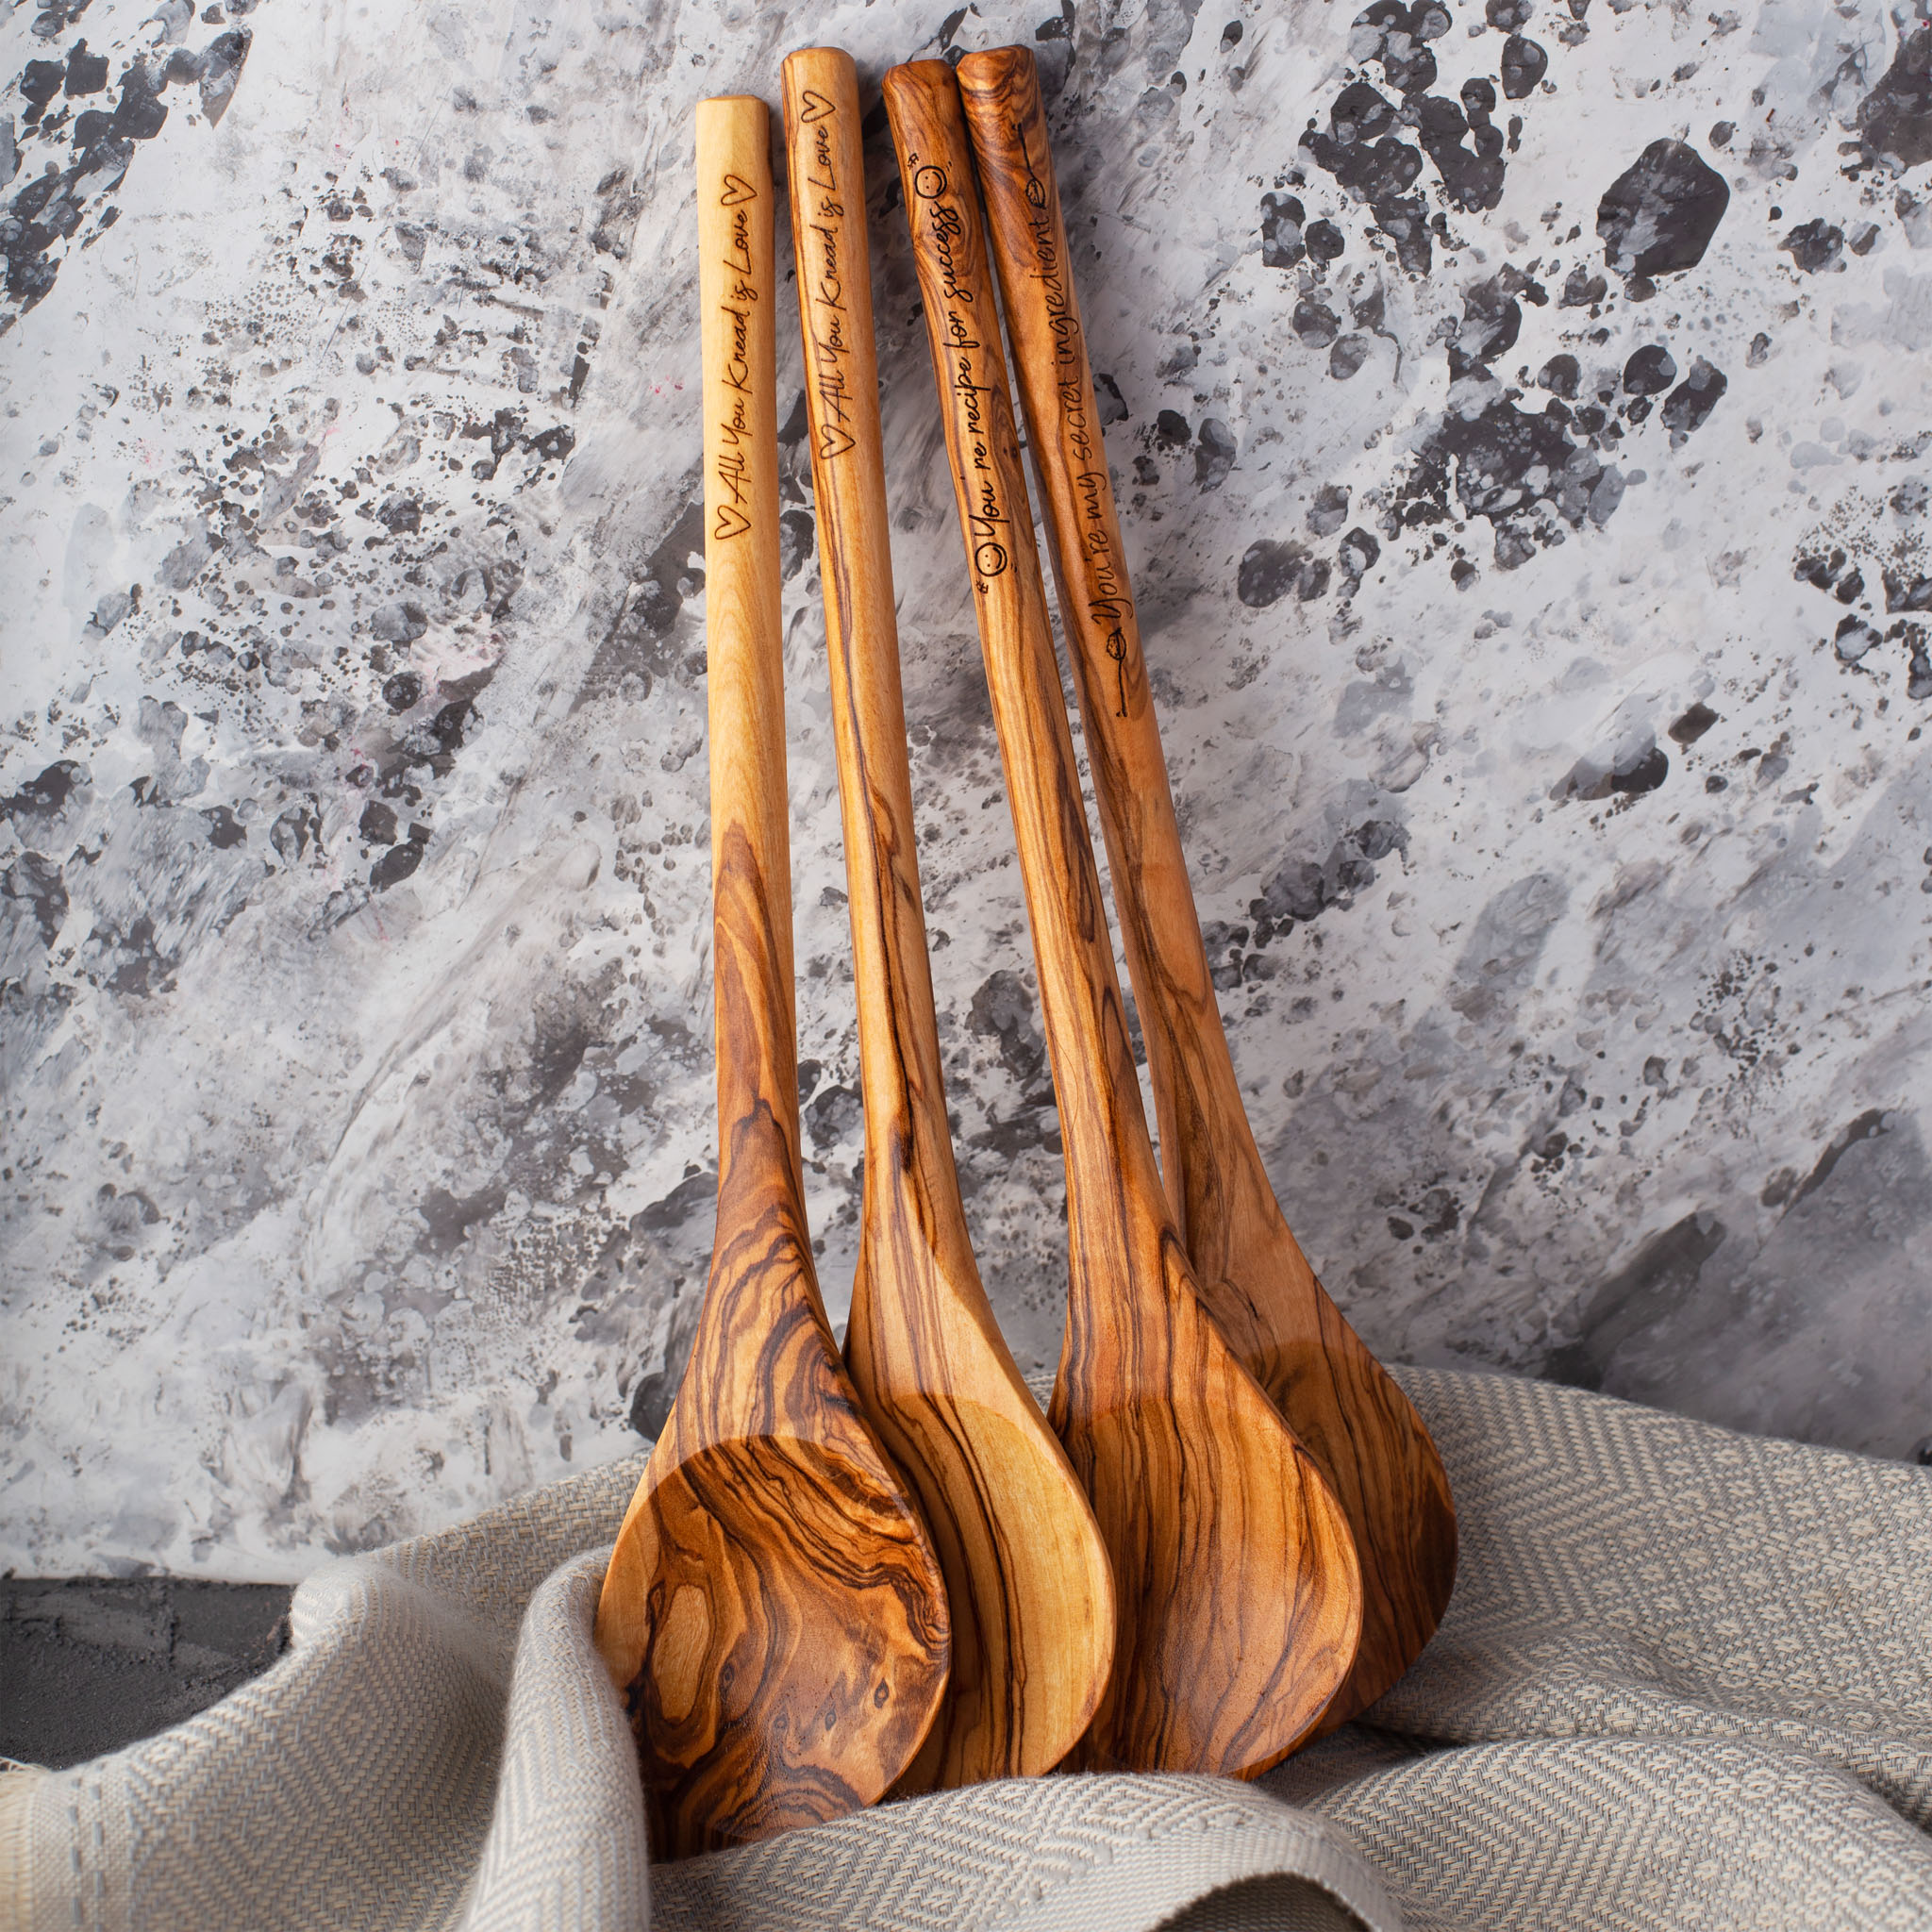 Dish Towels and Olive Wood Spoon Gift